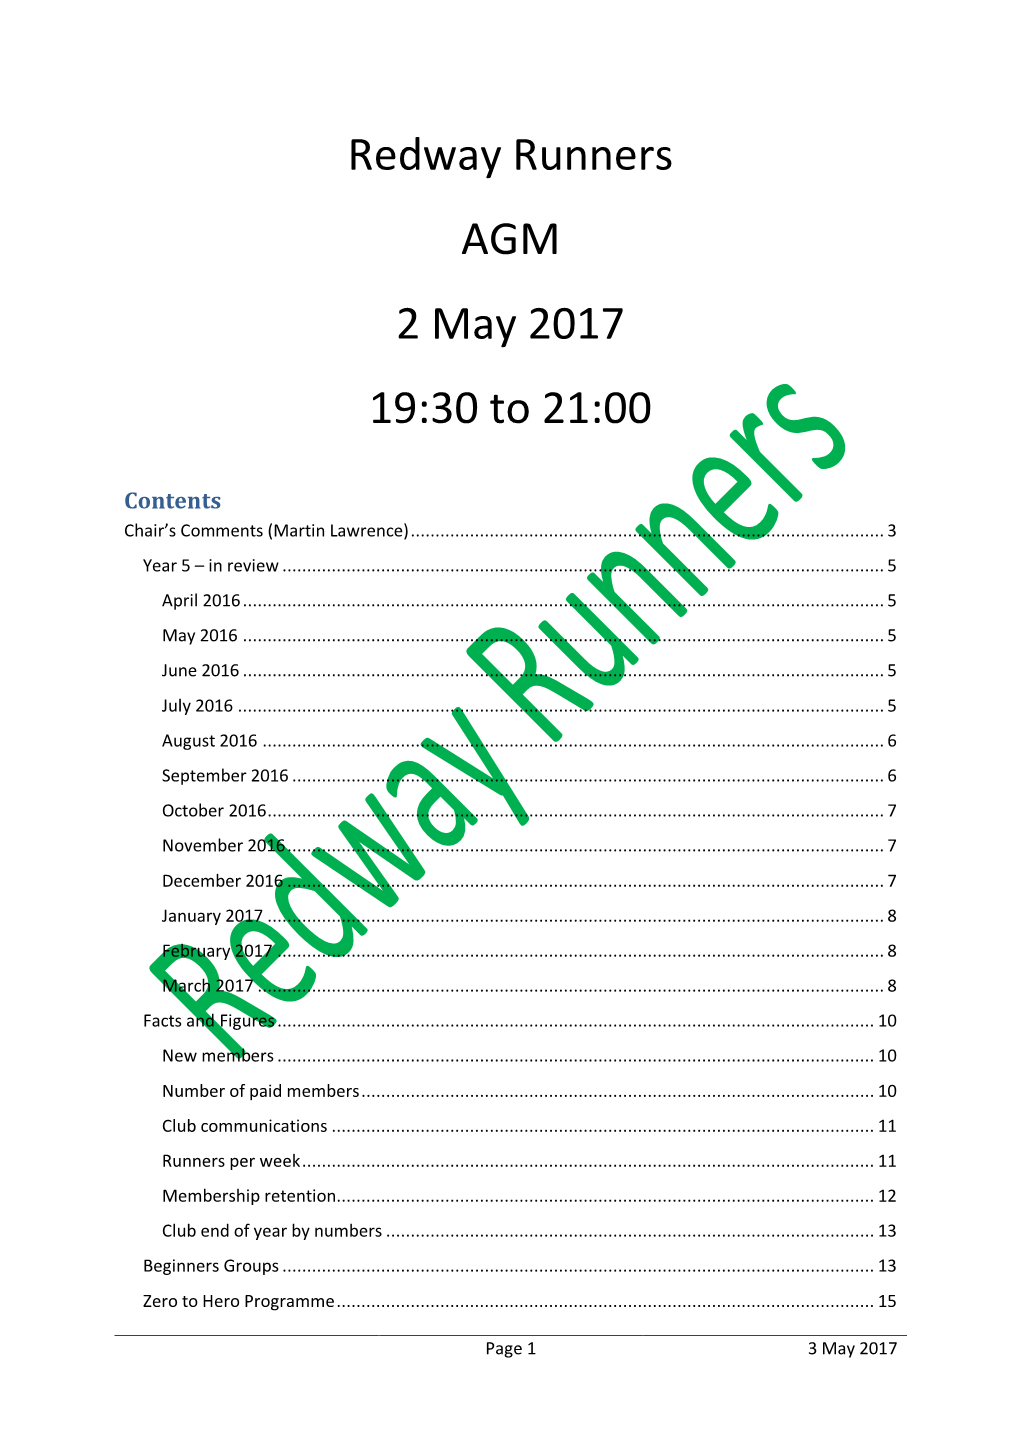 Redway Runners AGM 2 May 2017 19:30 to 21:00